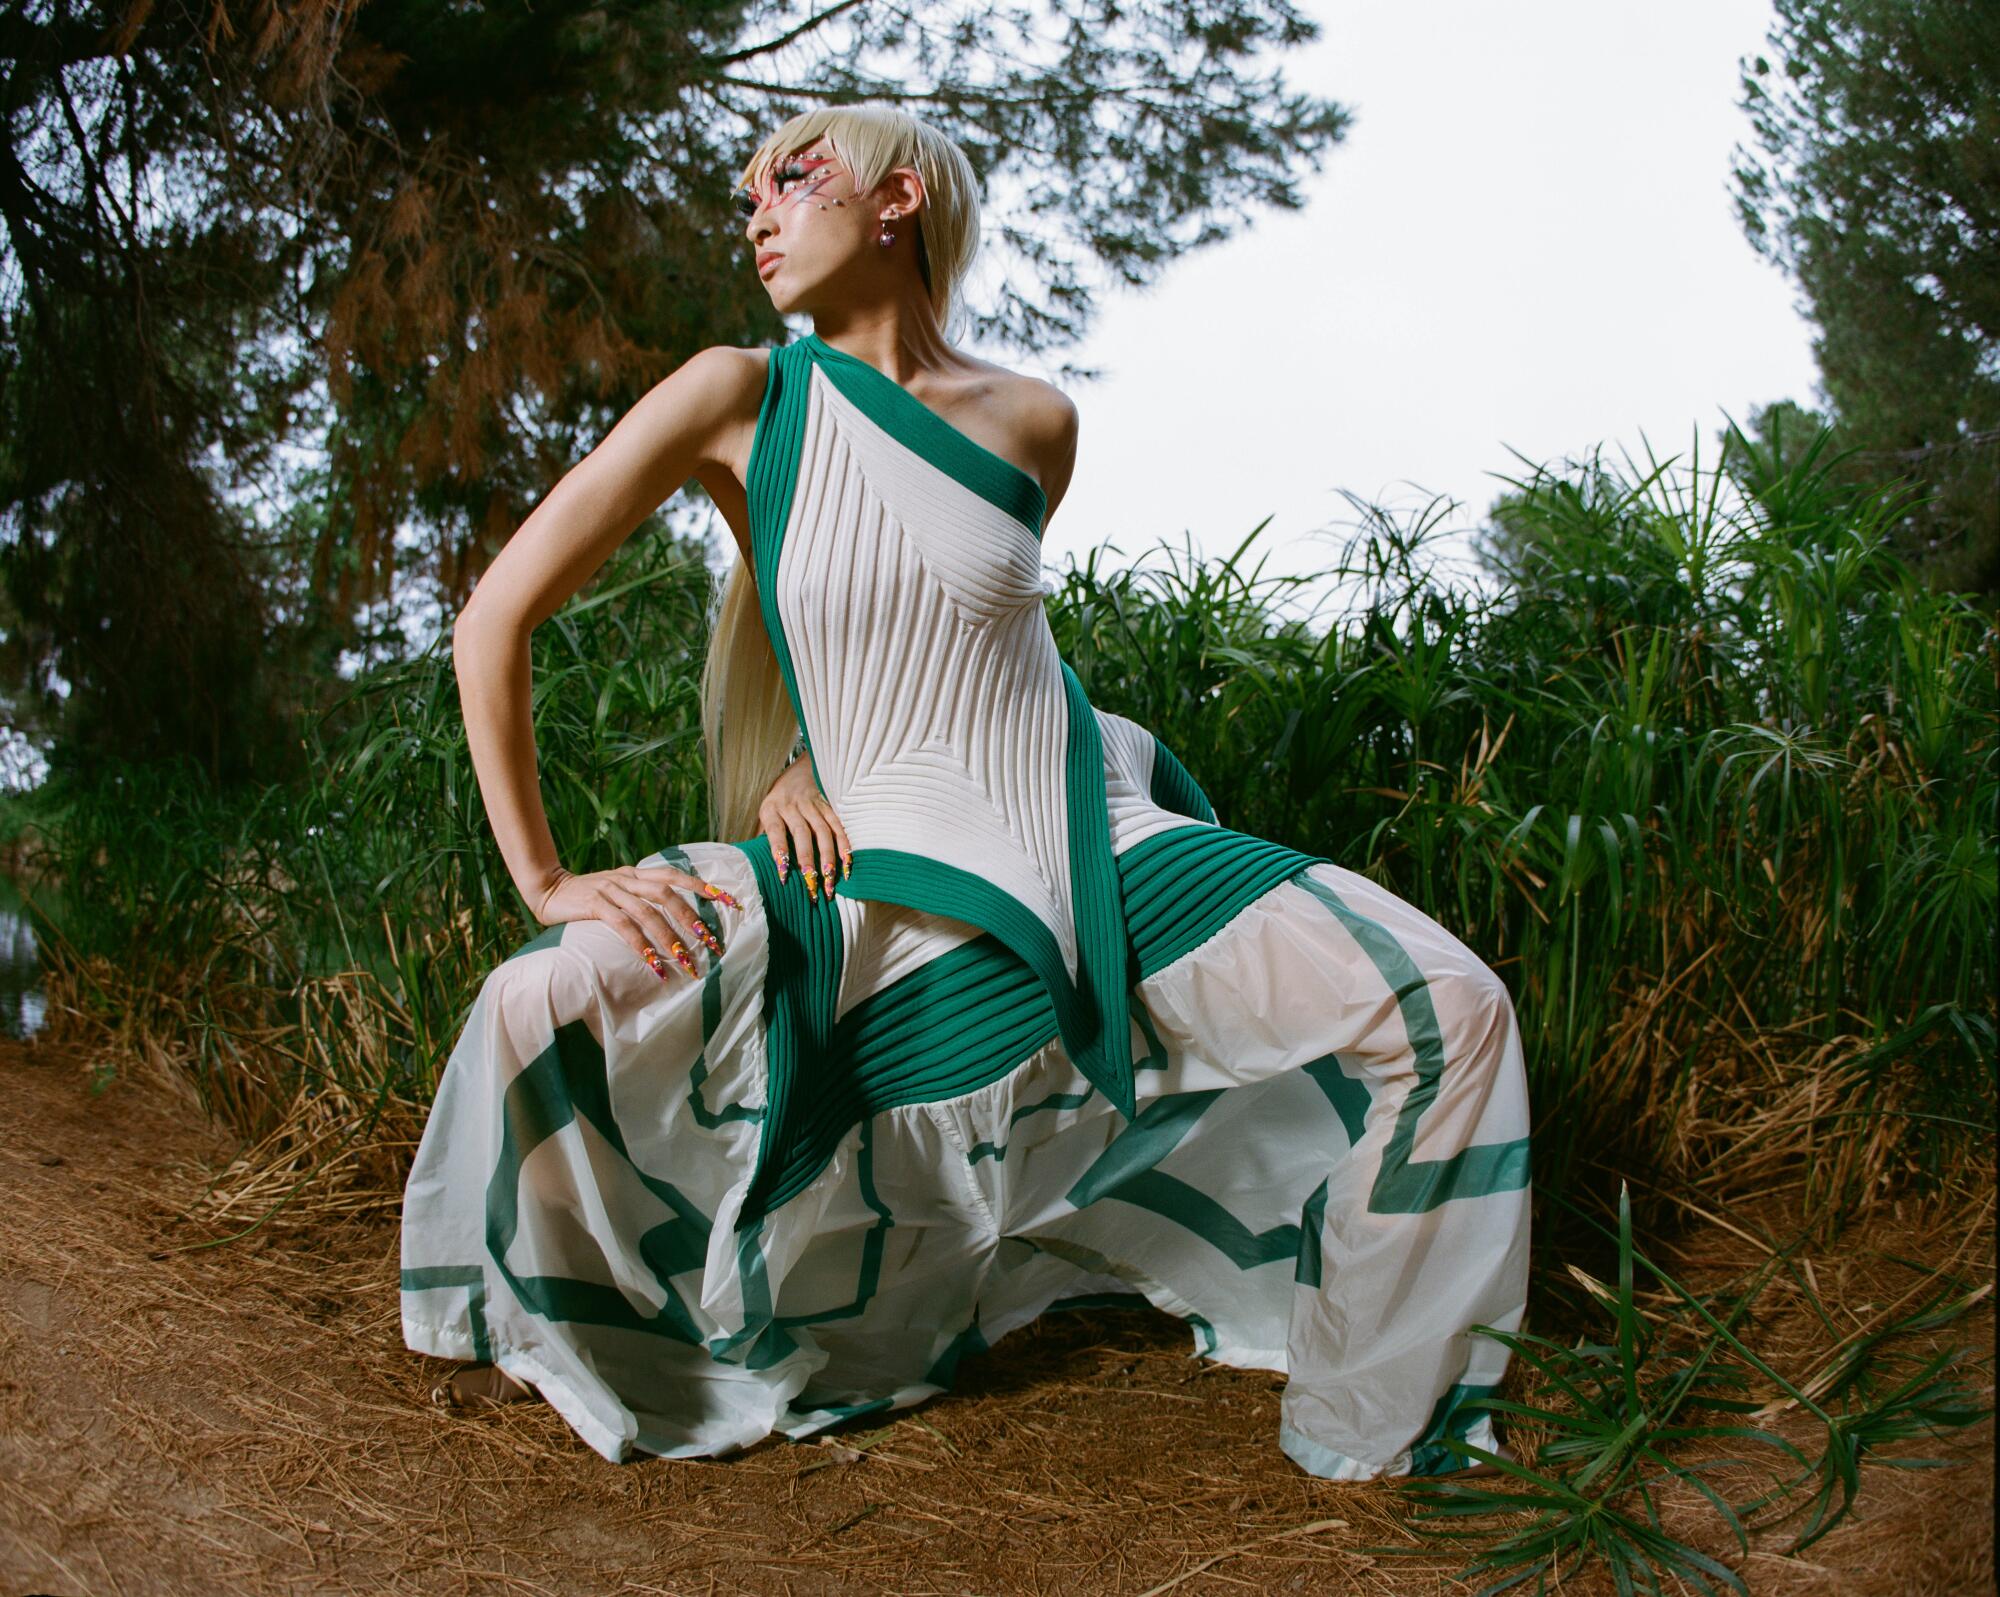 A model kneels outside in a white tank with green trim and a white skirt with green abstract stripes